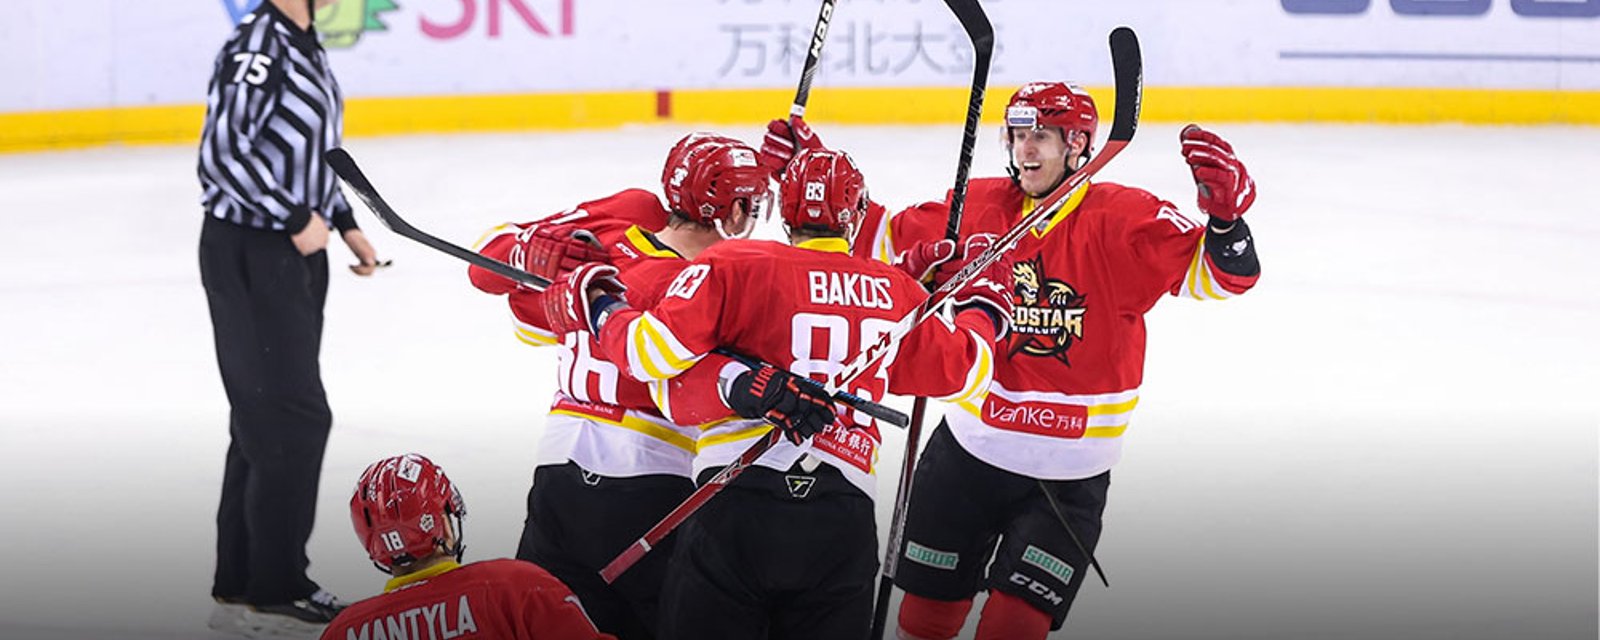 China and the KHL enter into exclusive agreement